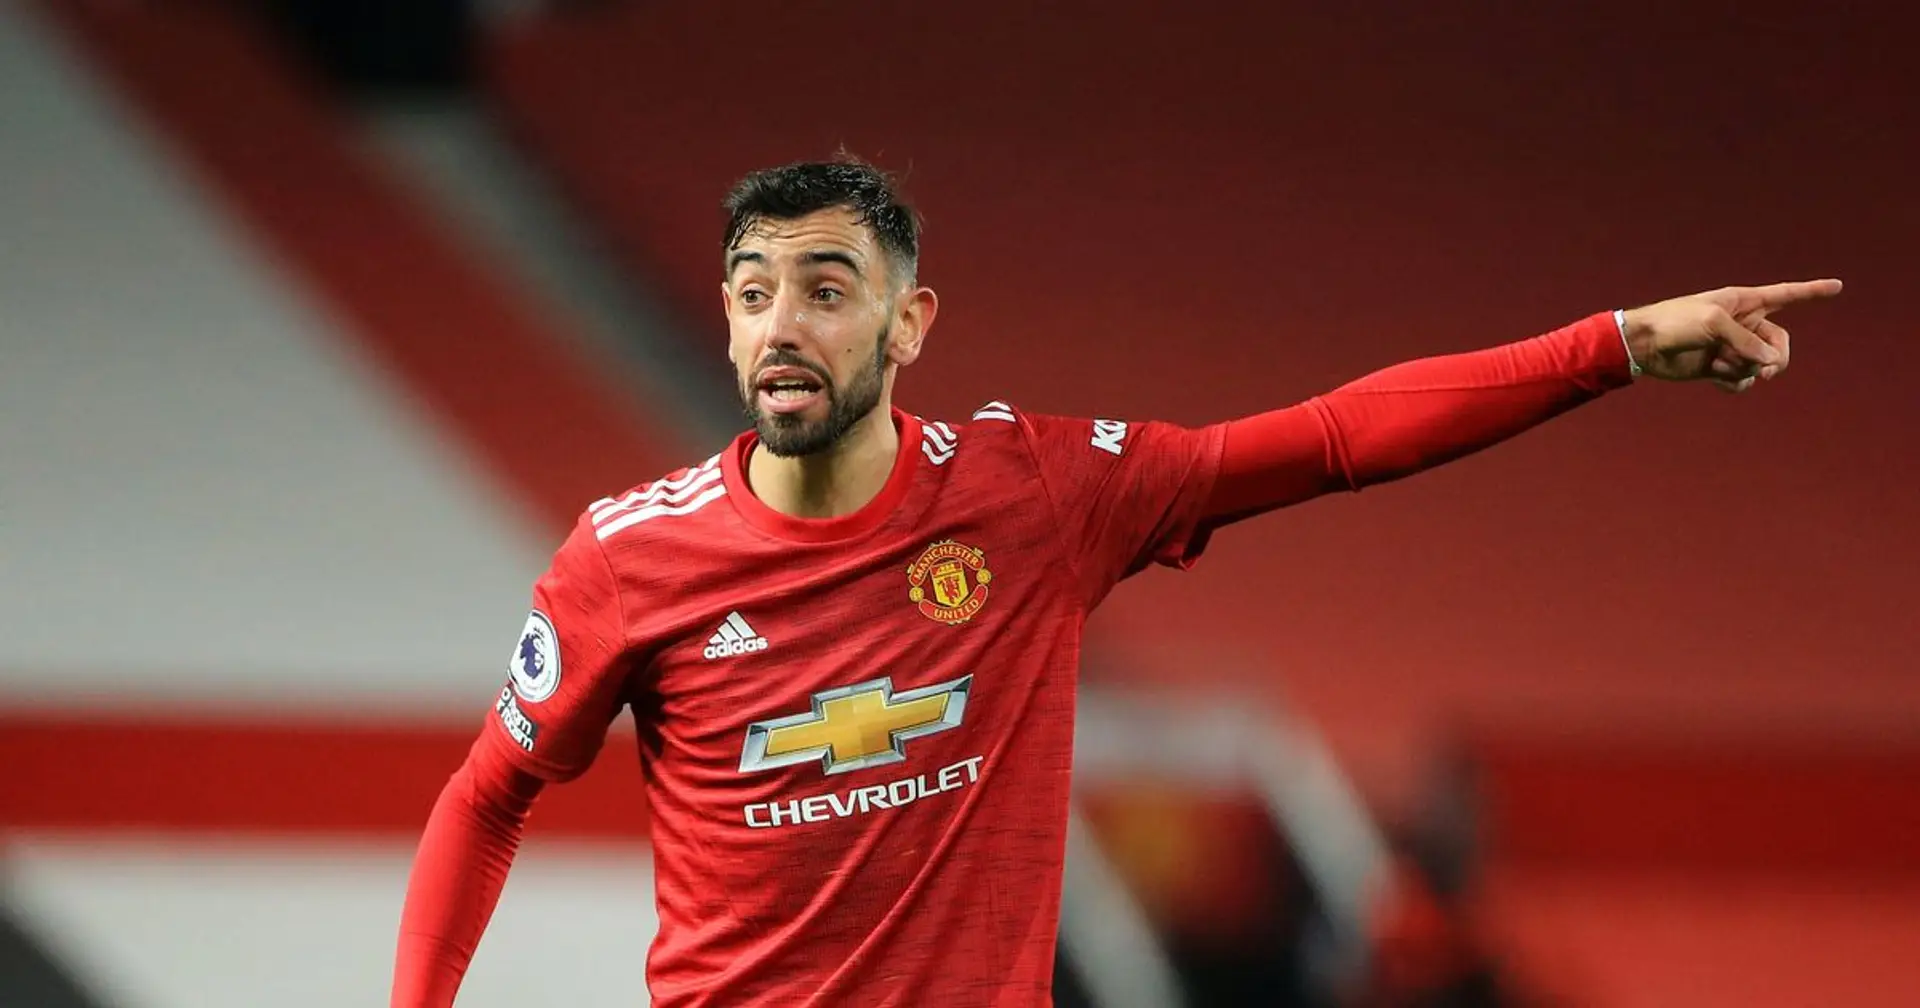 'He's already at the top': Bruno Fernandes told to ignore potential offers from elsewhere